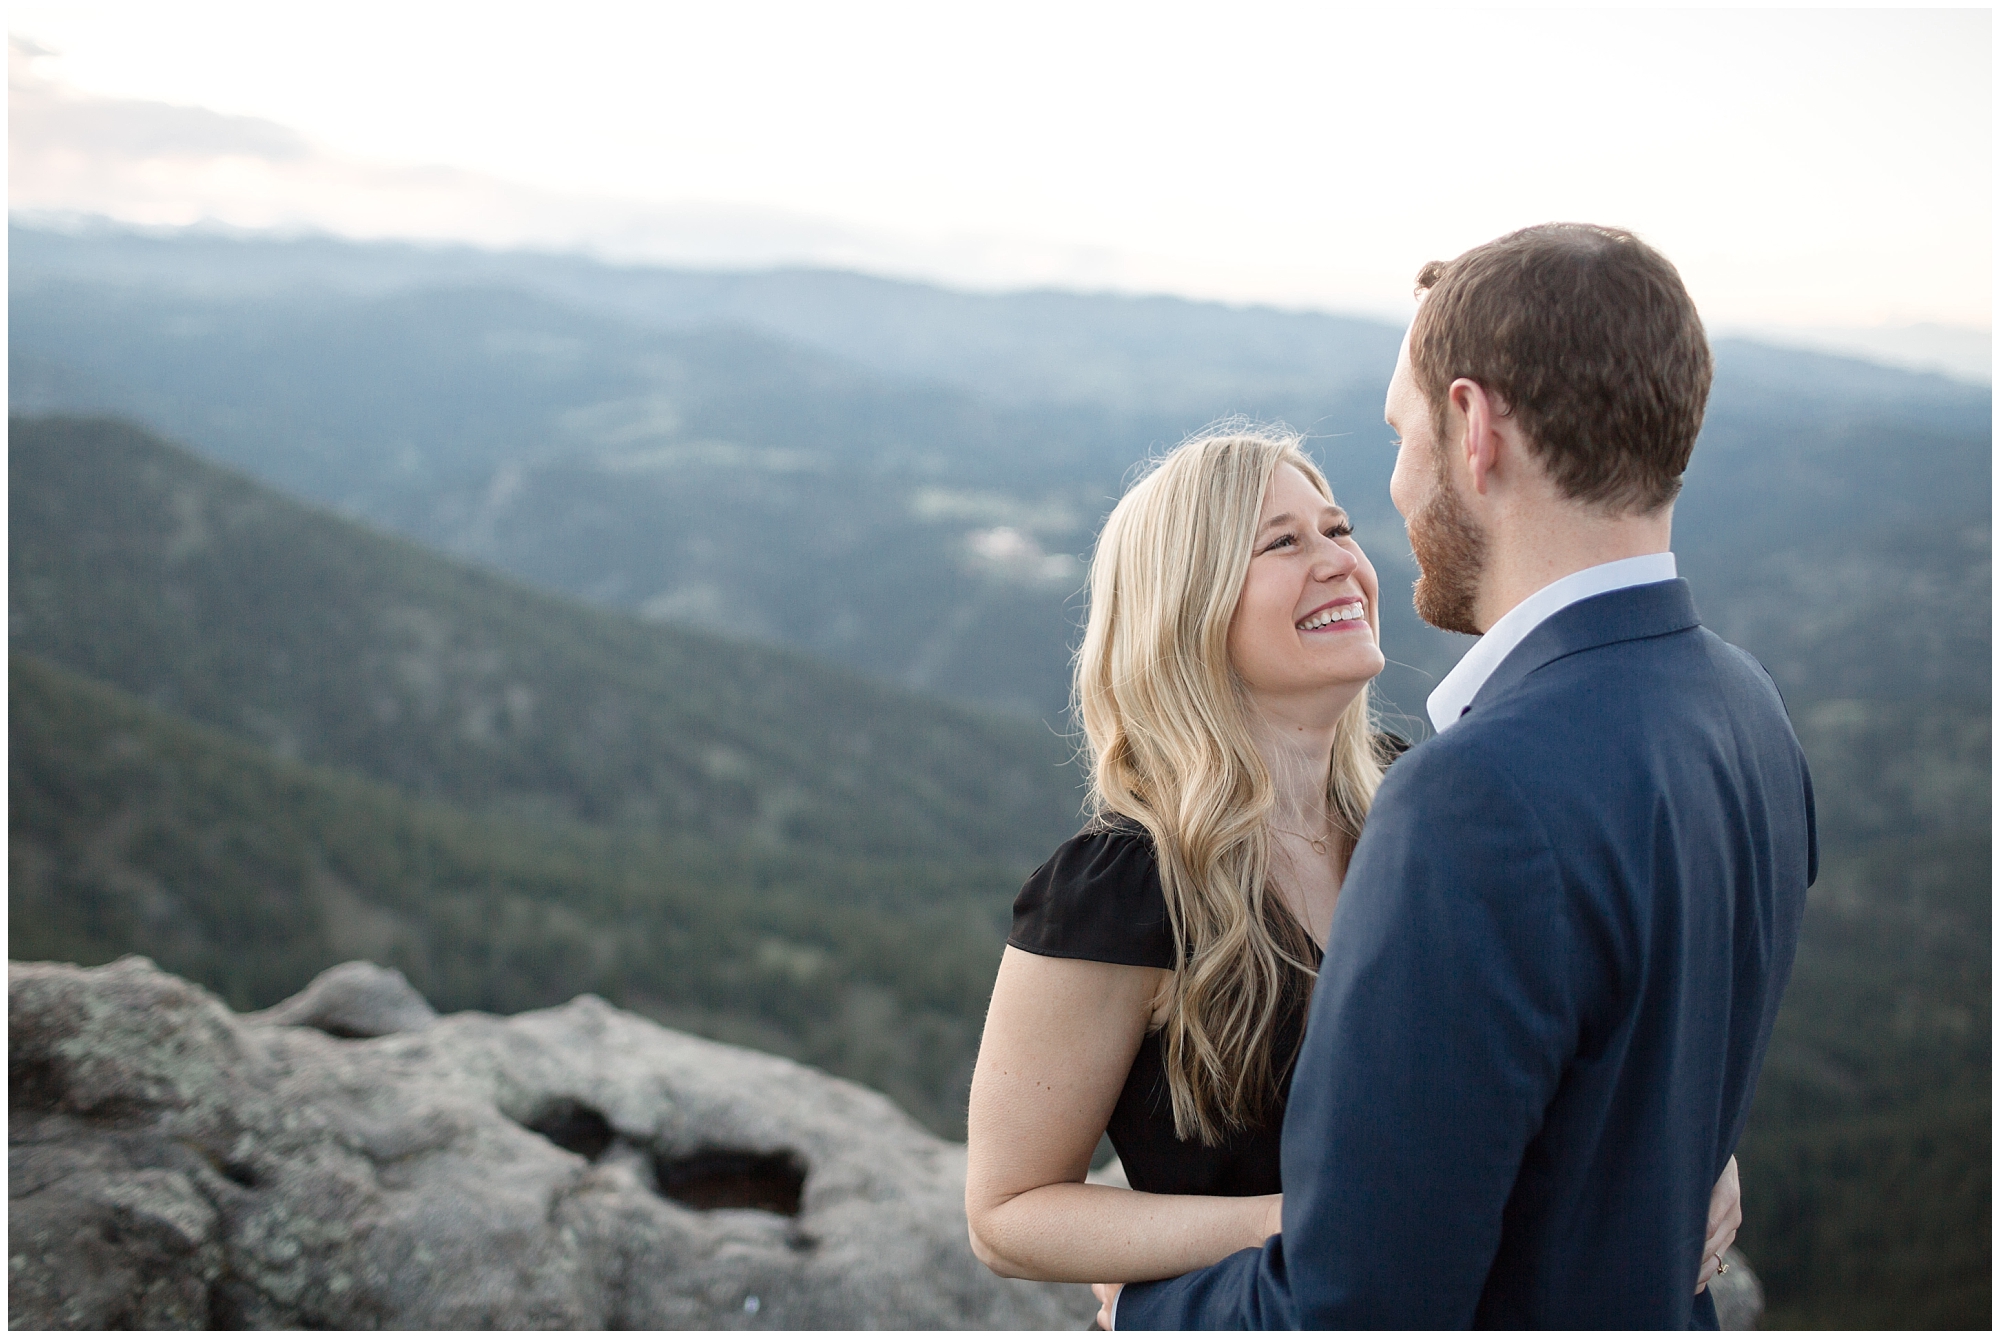 Woman looks up at her fiance during their Colorado mountain engagement photos.